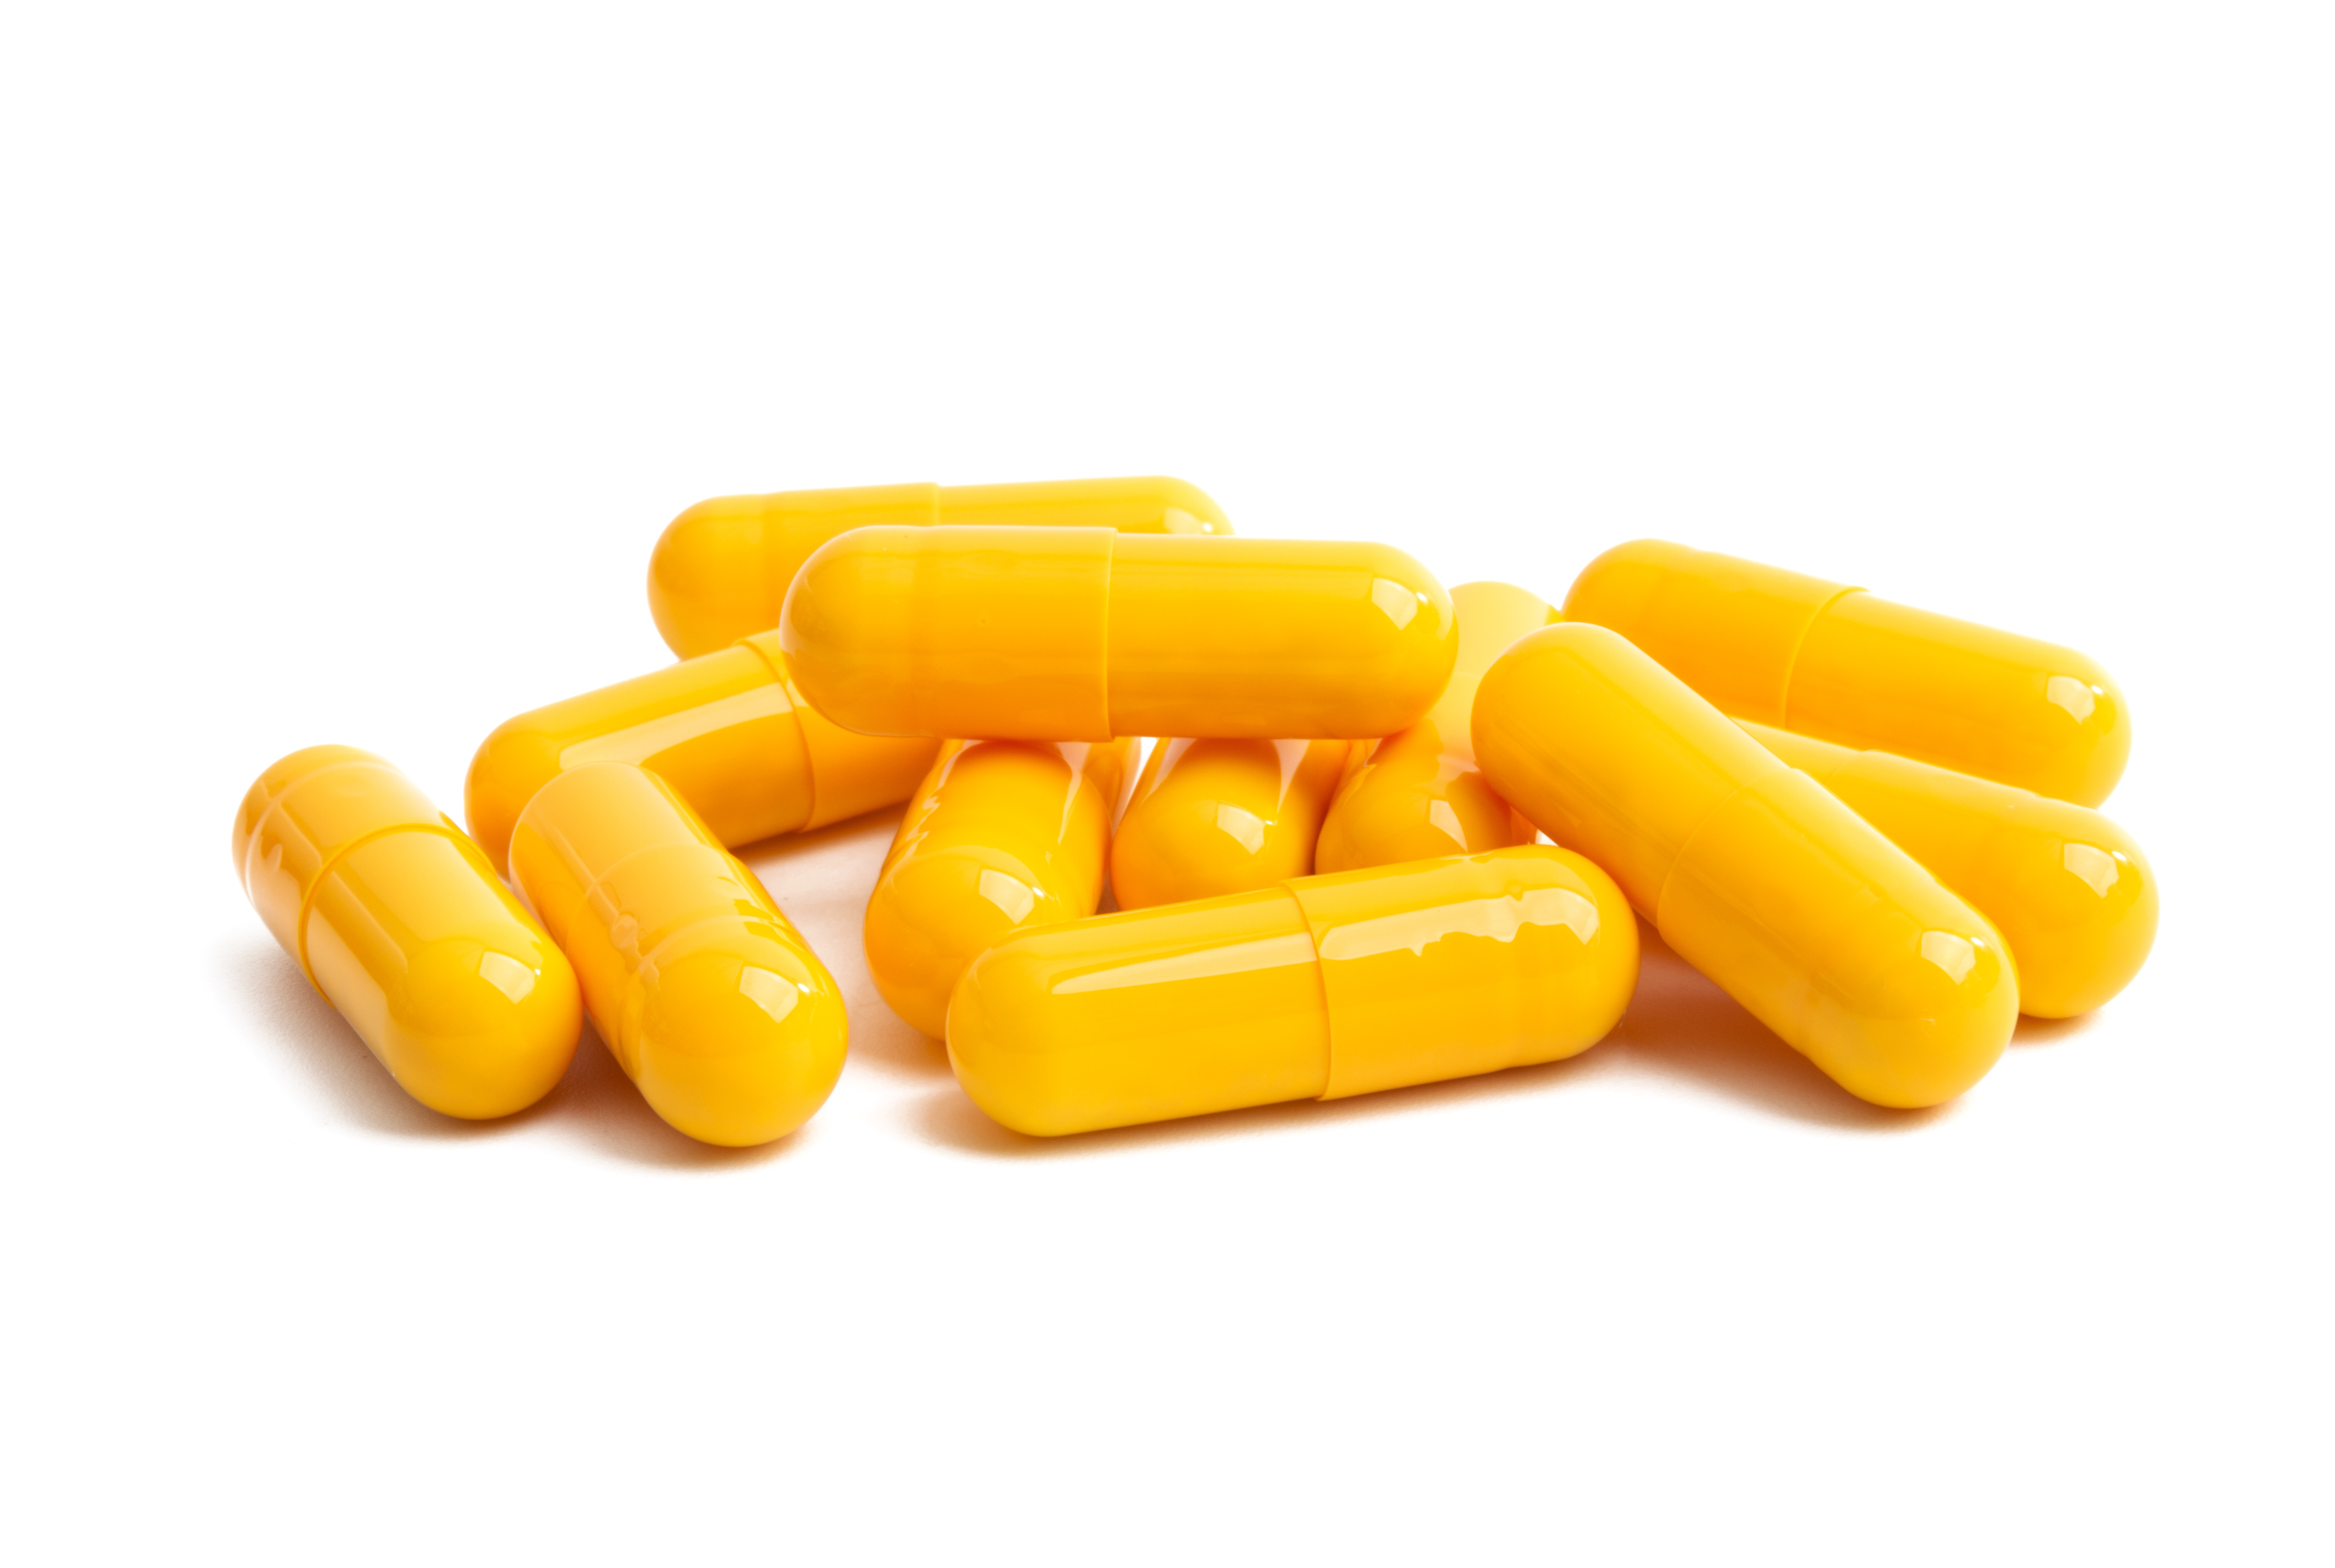 What Is the Difference Between Tablets & Capsules?